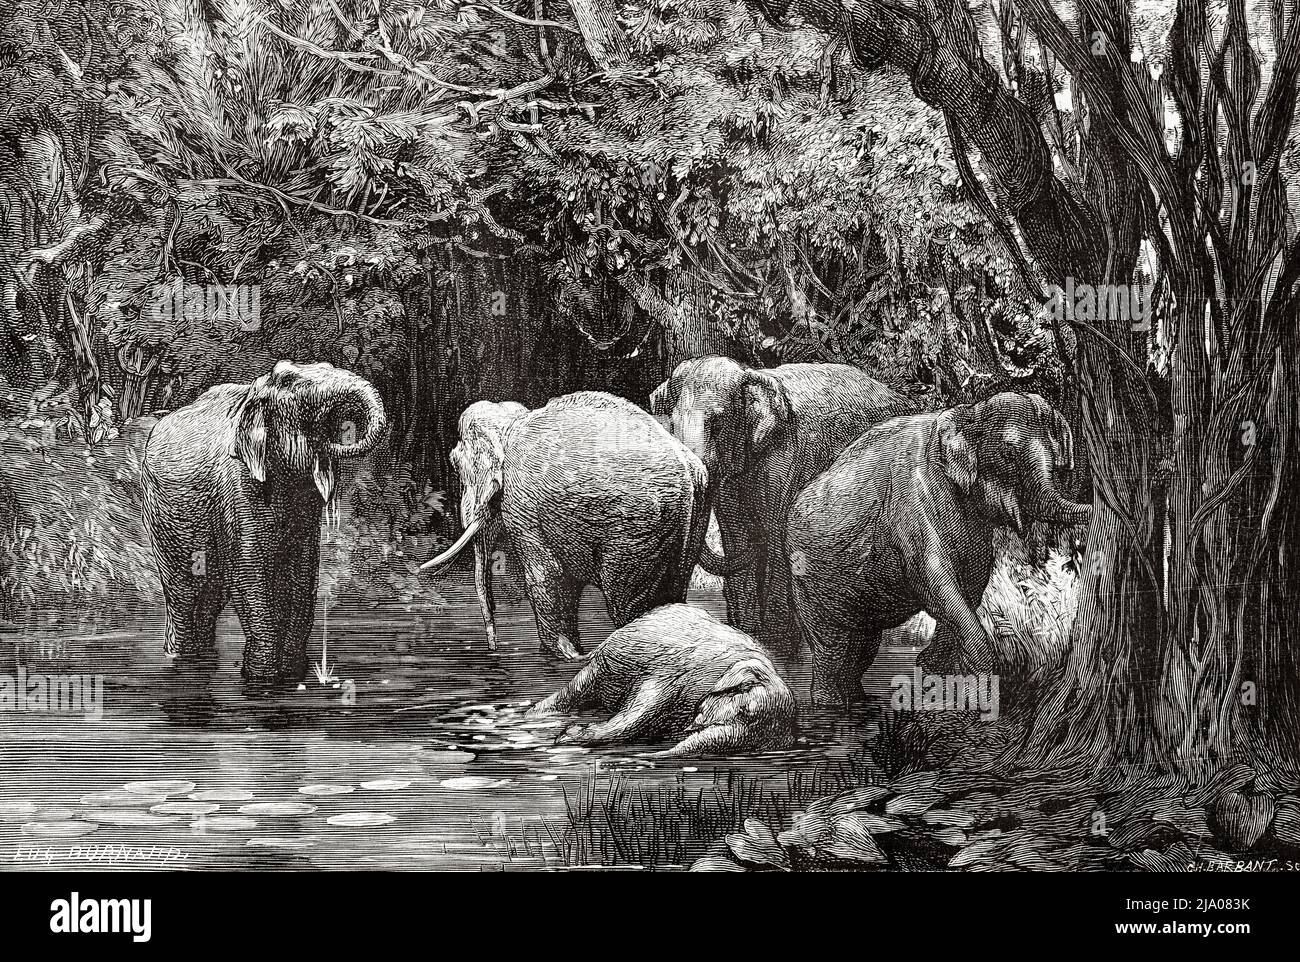 Wild Elephants in the Mekong River, Champassak. Laos. Southeast Asia. Laos and the wild populations of Indo-China by Doctor Harmand 1877 Stock Photo